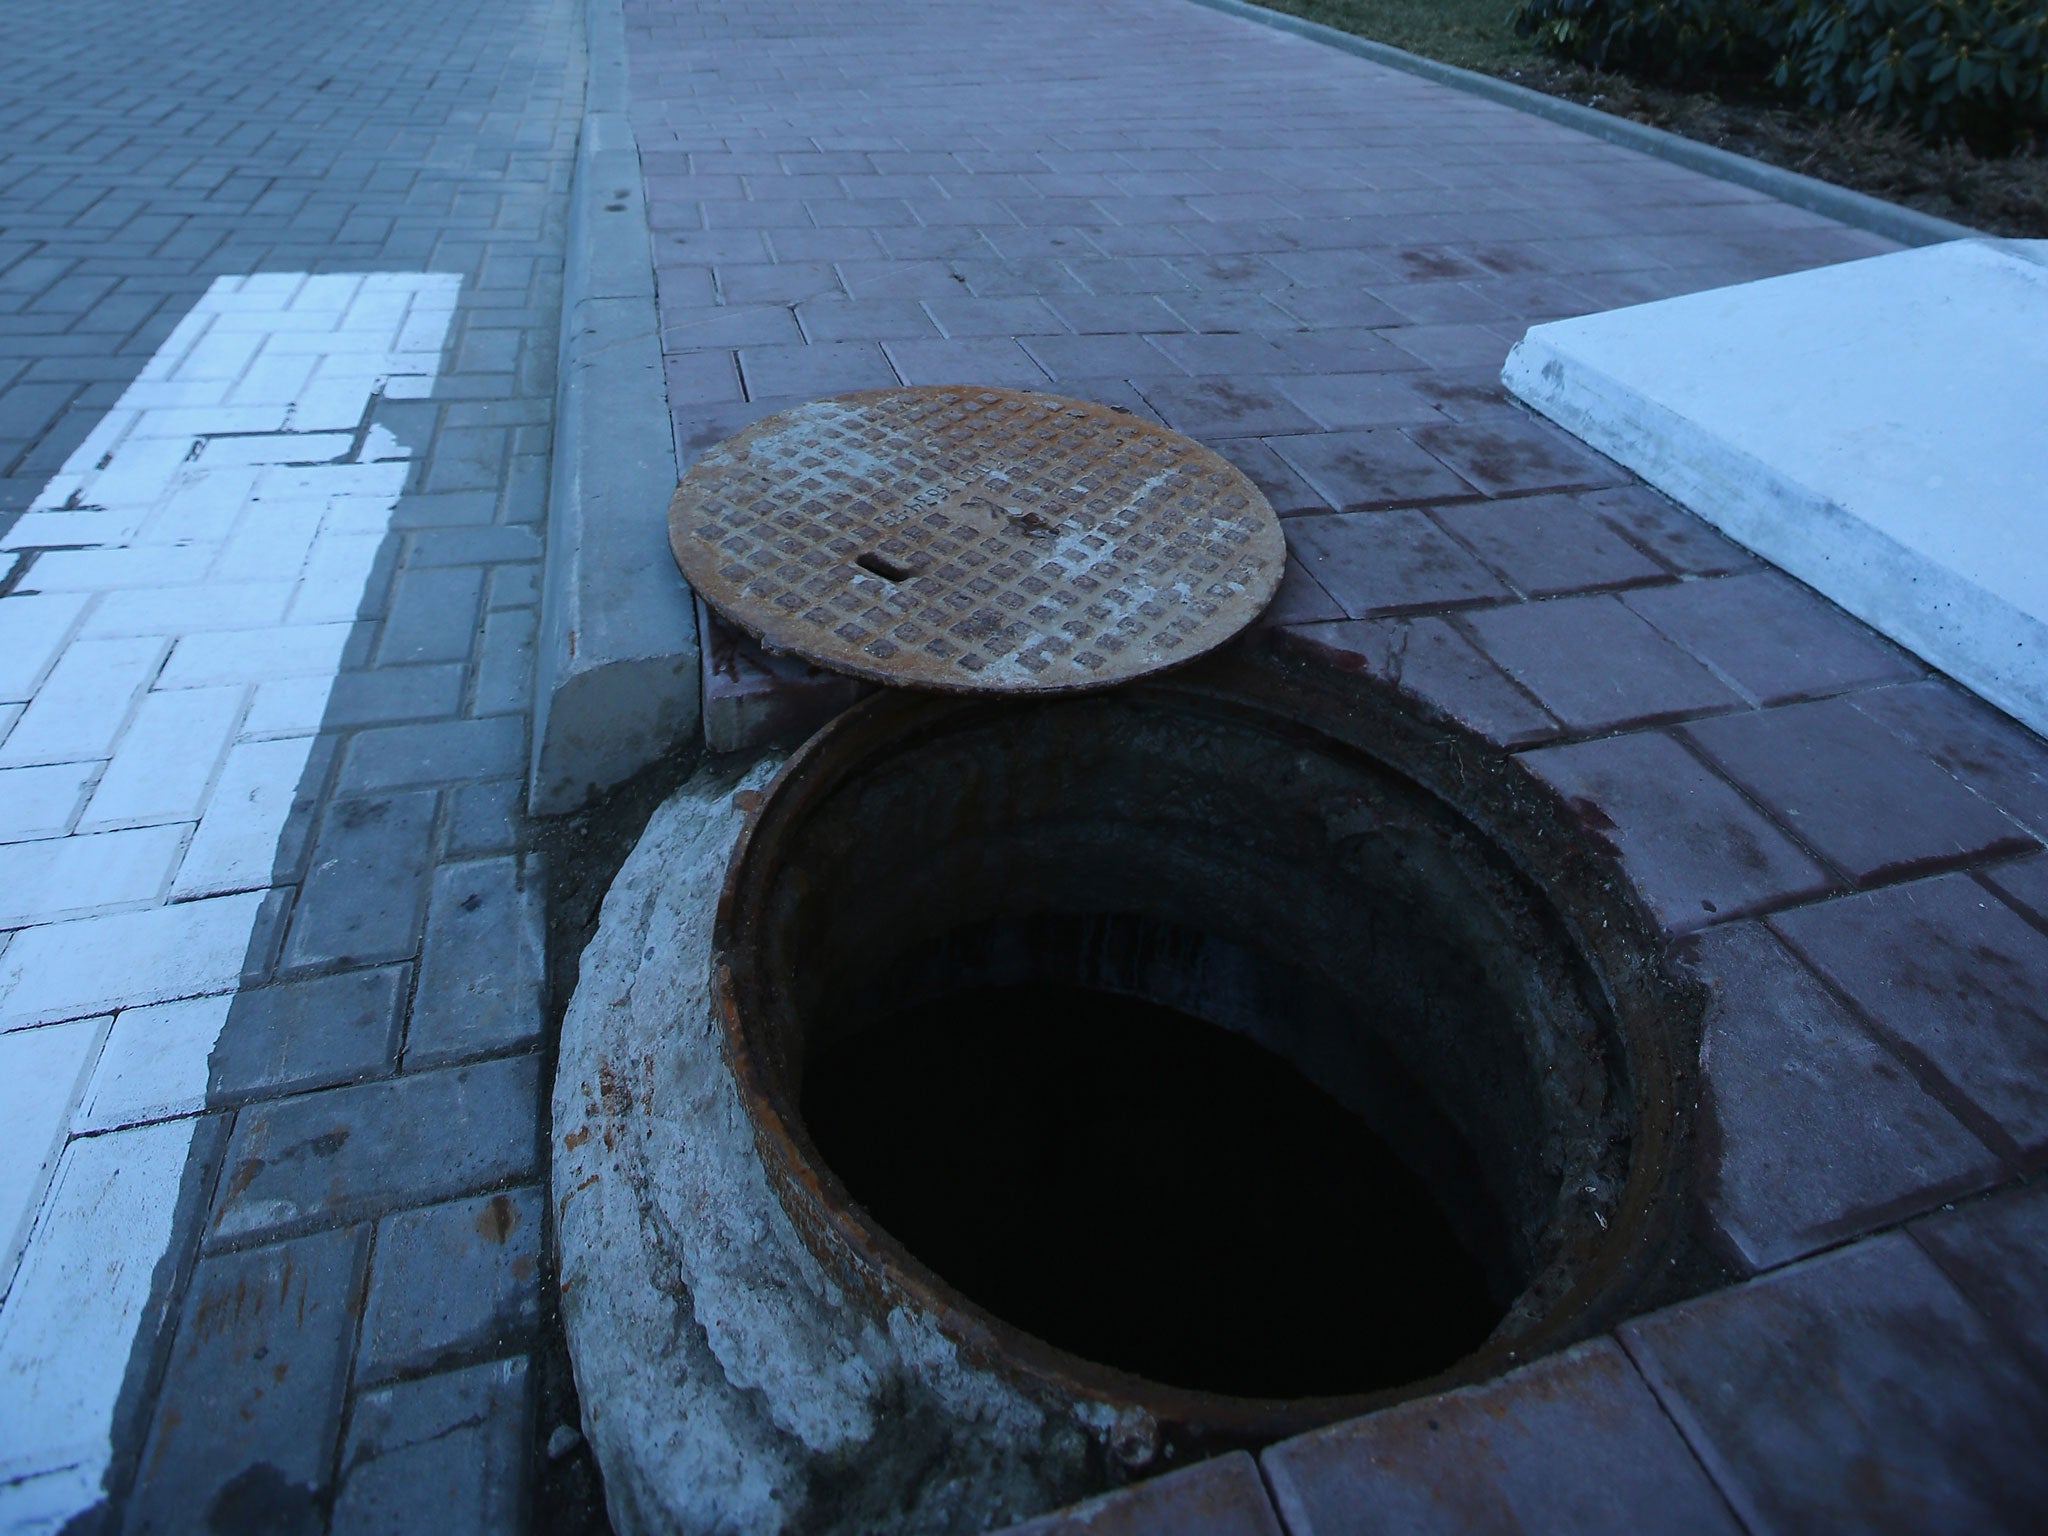 An open manhole cover (unrelated to the incident).